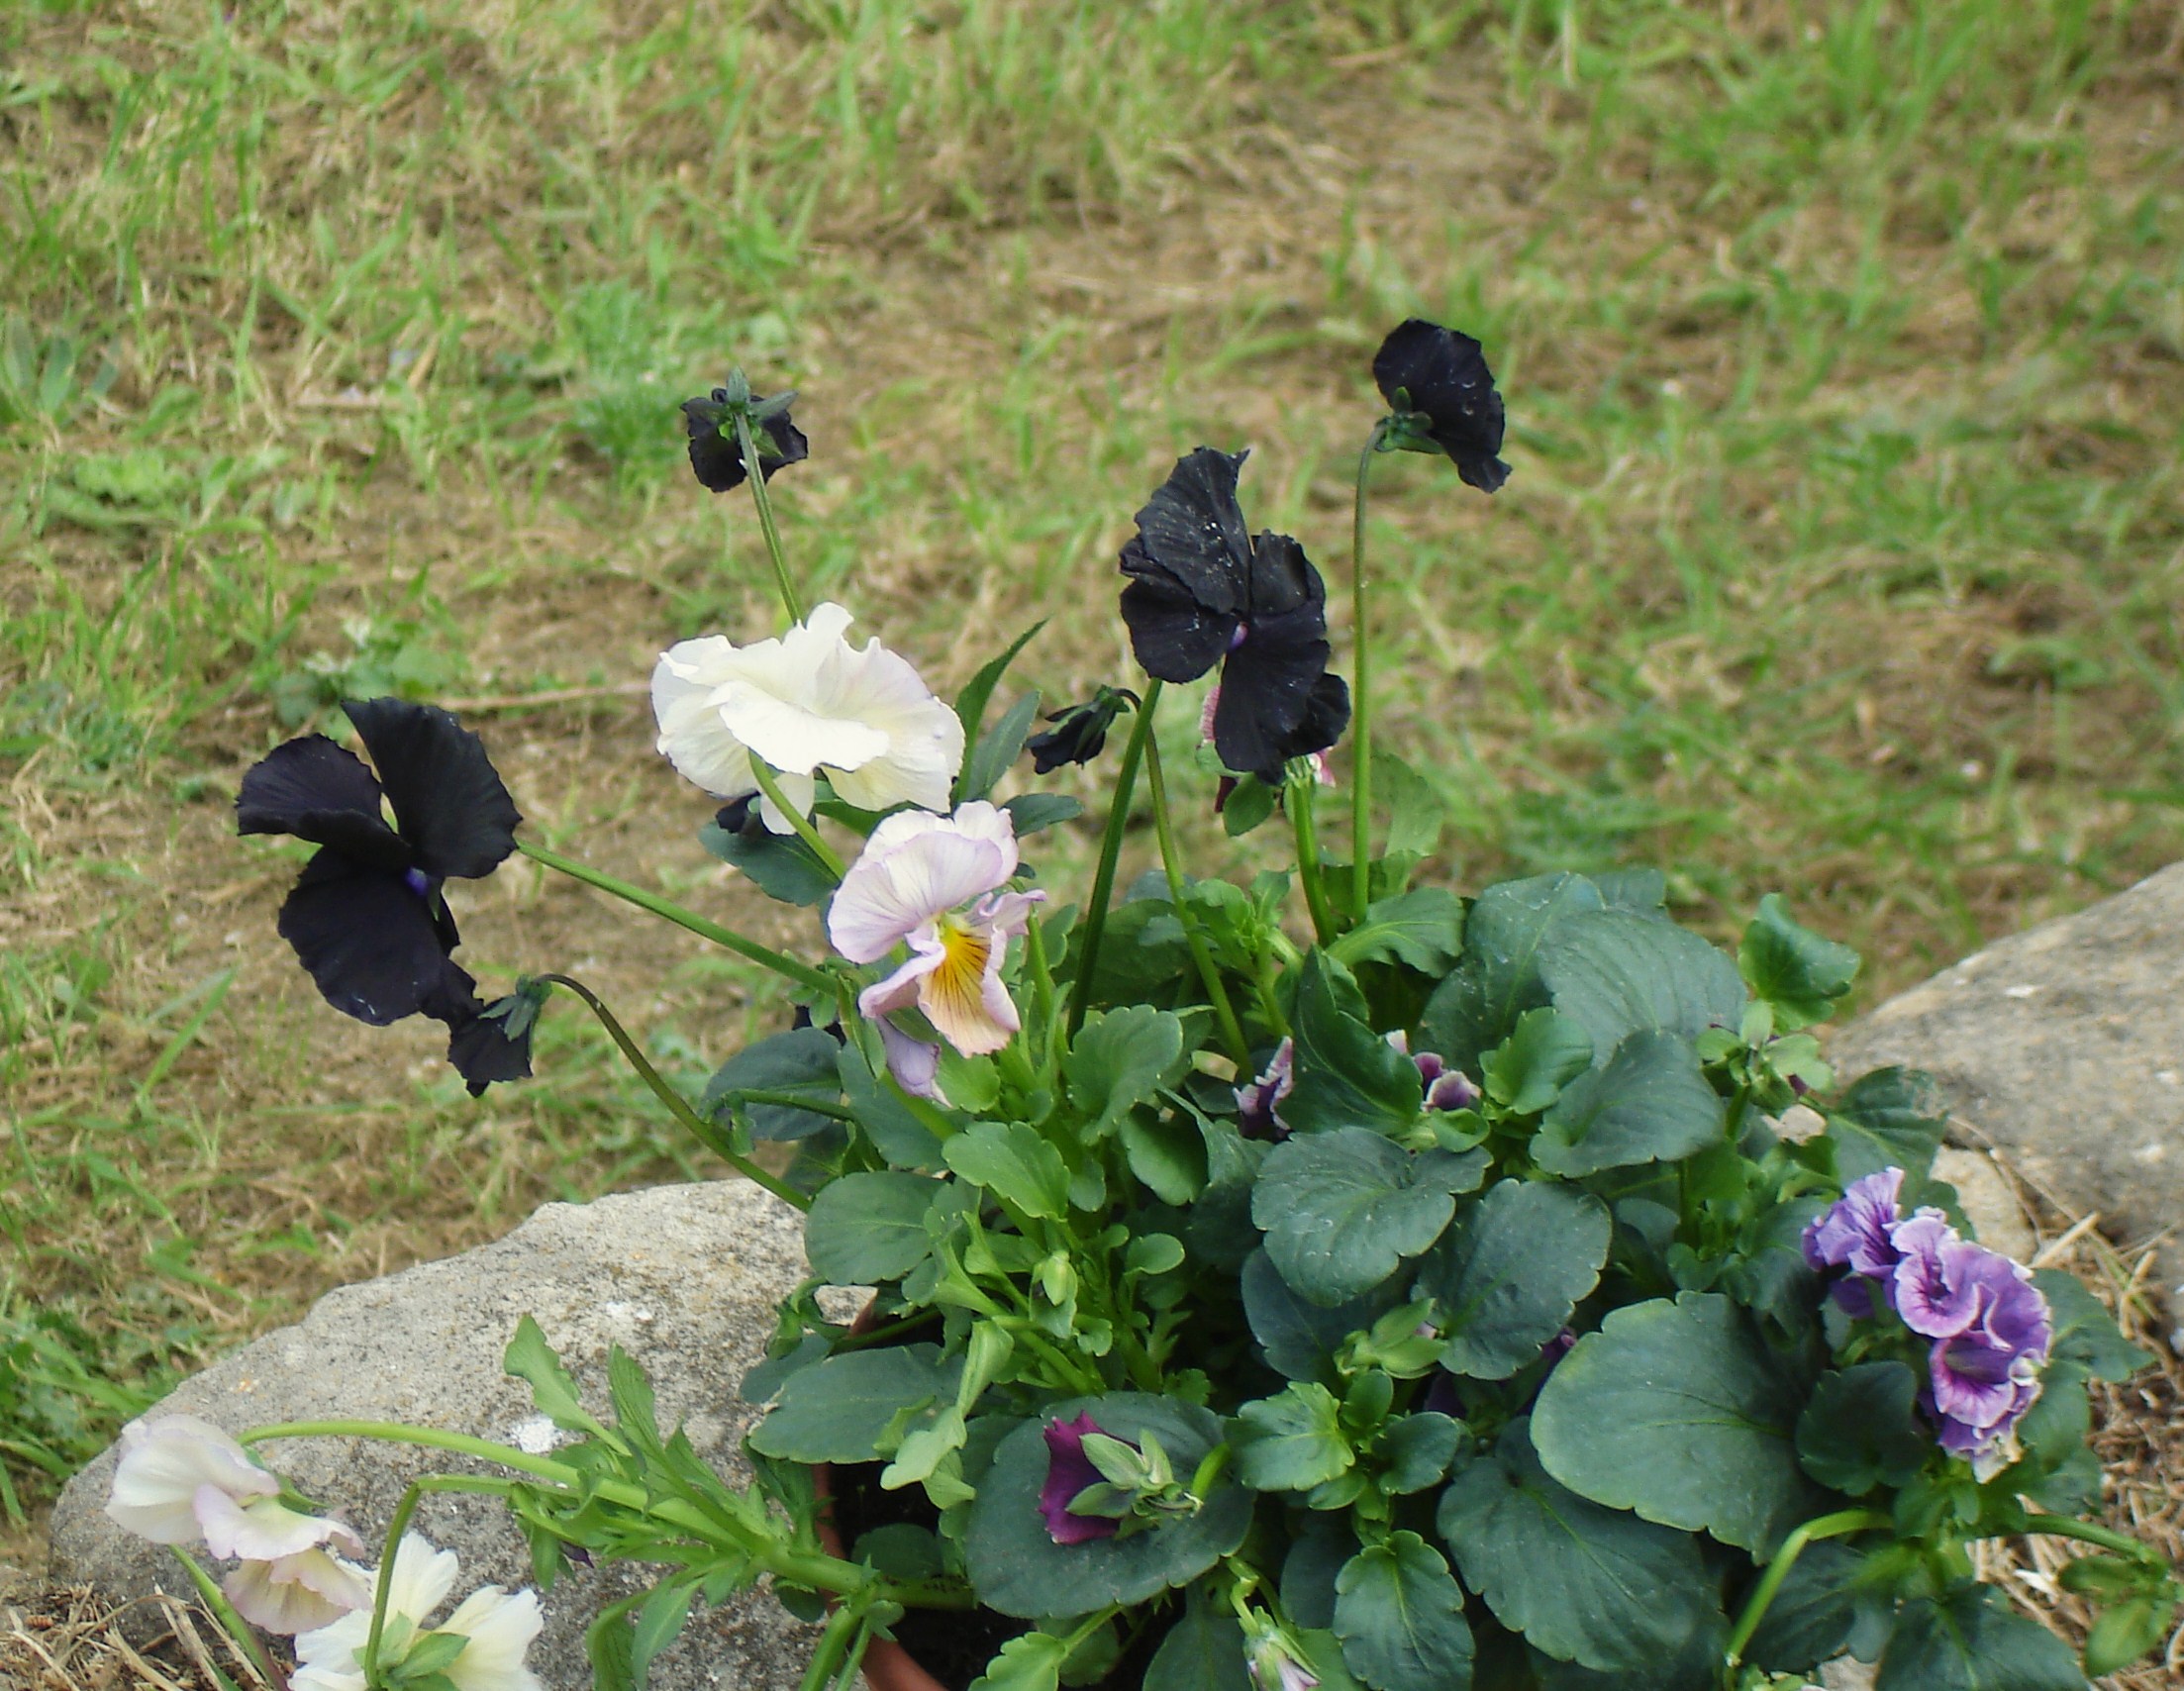 A SICILIAN ODYSSEY finds black pansies in Corleone, Siicly on Holy Friday...